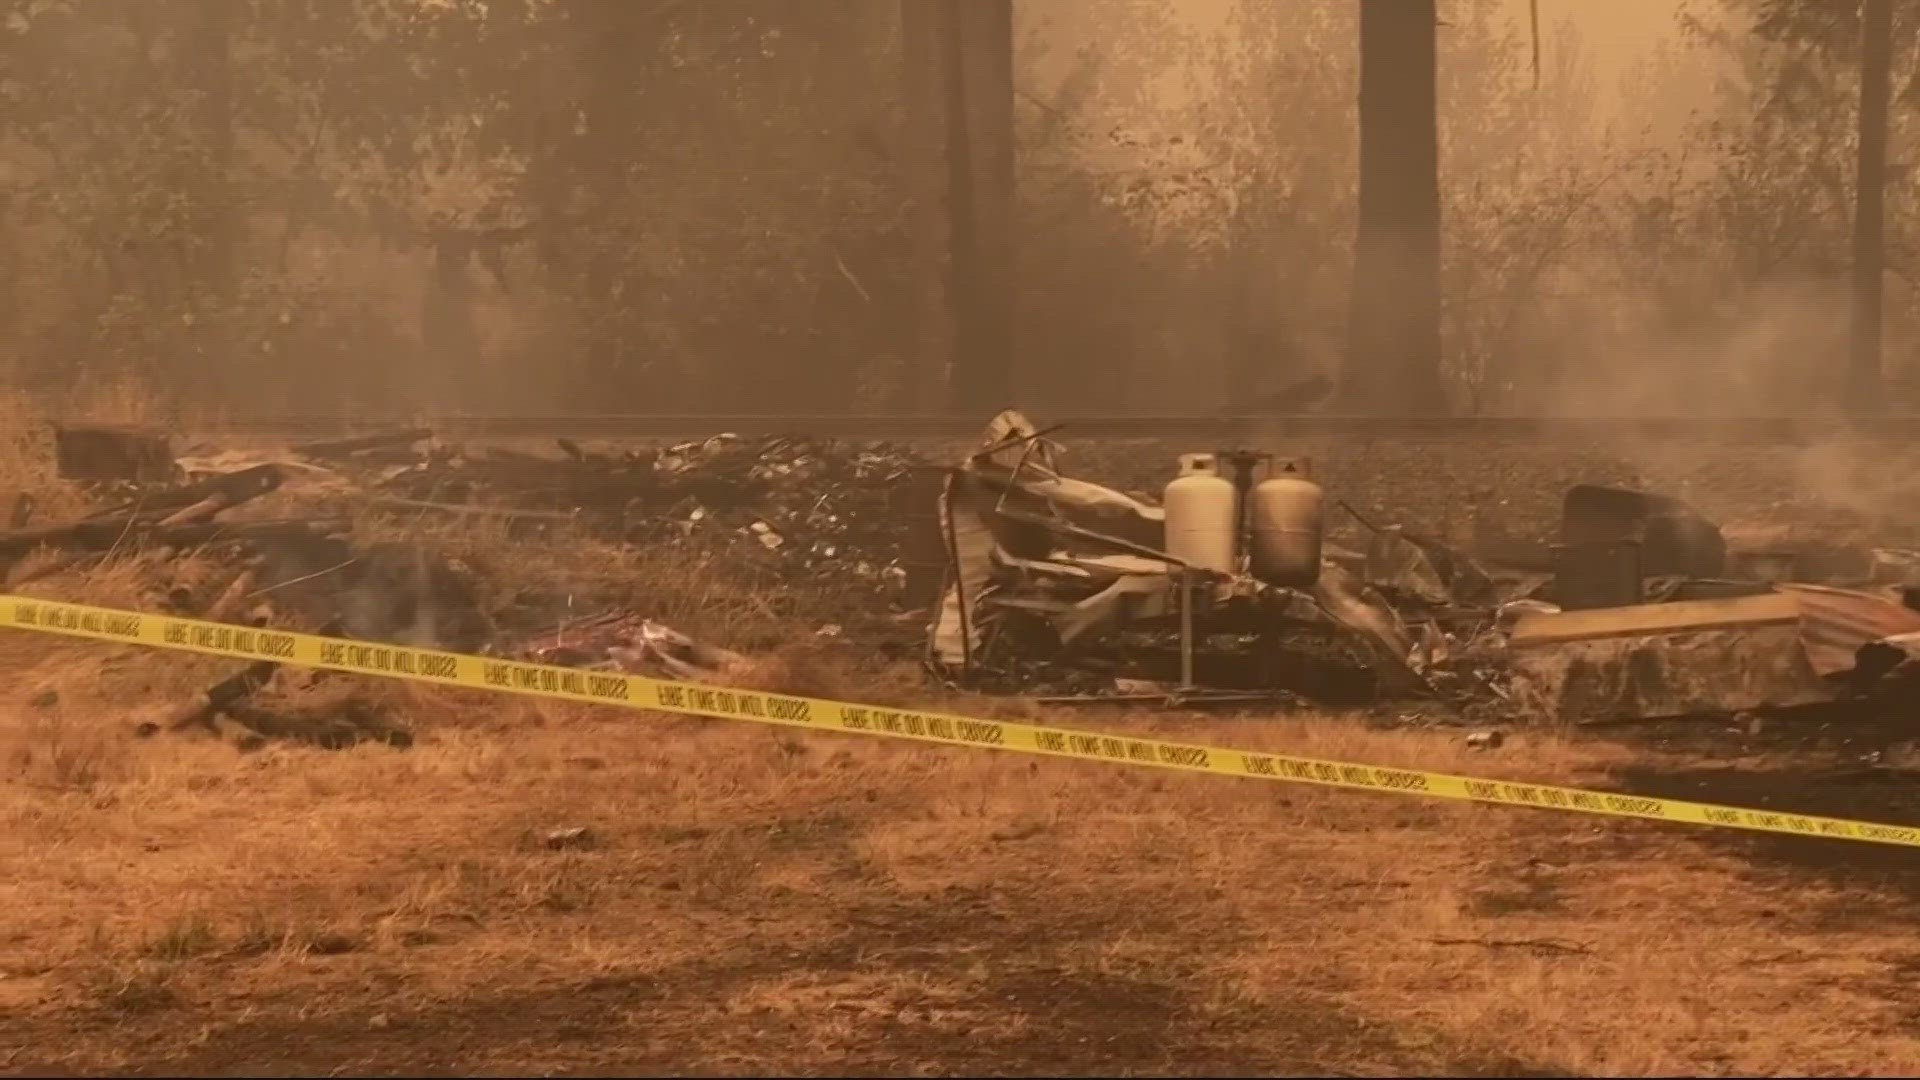 The power company is calling its witnesses in the landmark case, arguing that unpredictable weather is to blame for the 2020 wildfires, not electrical lines.